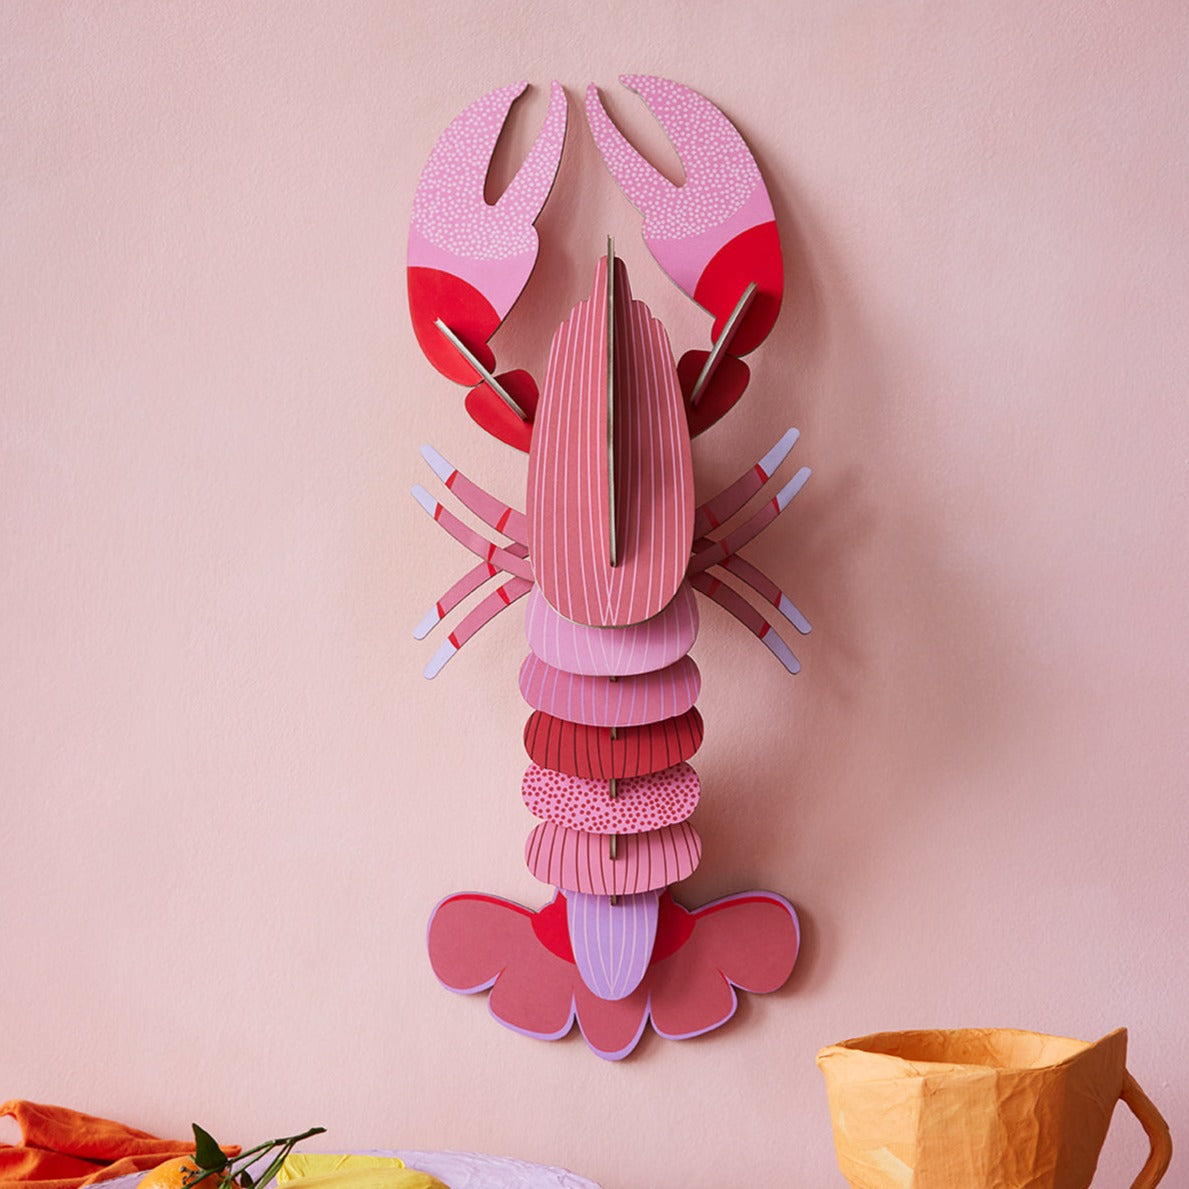 Studio Roof 3D Model Wall Decor - Deluxe Giant Pink Lobster